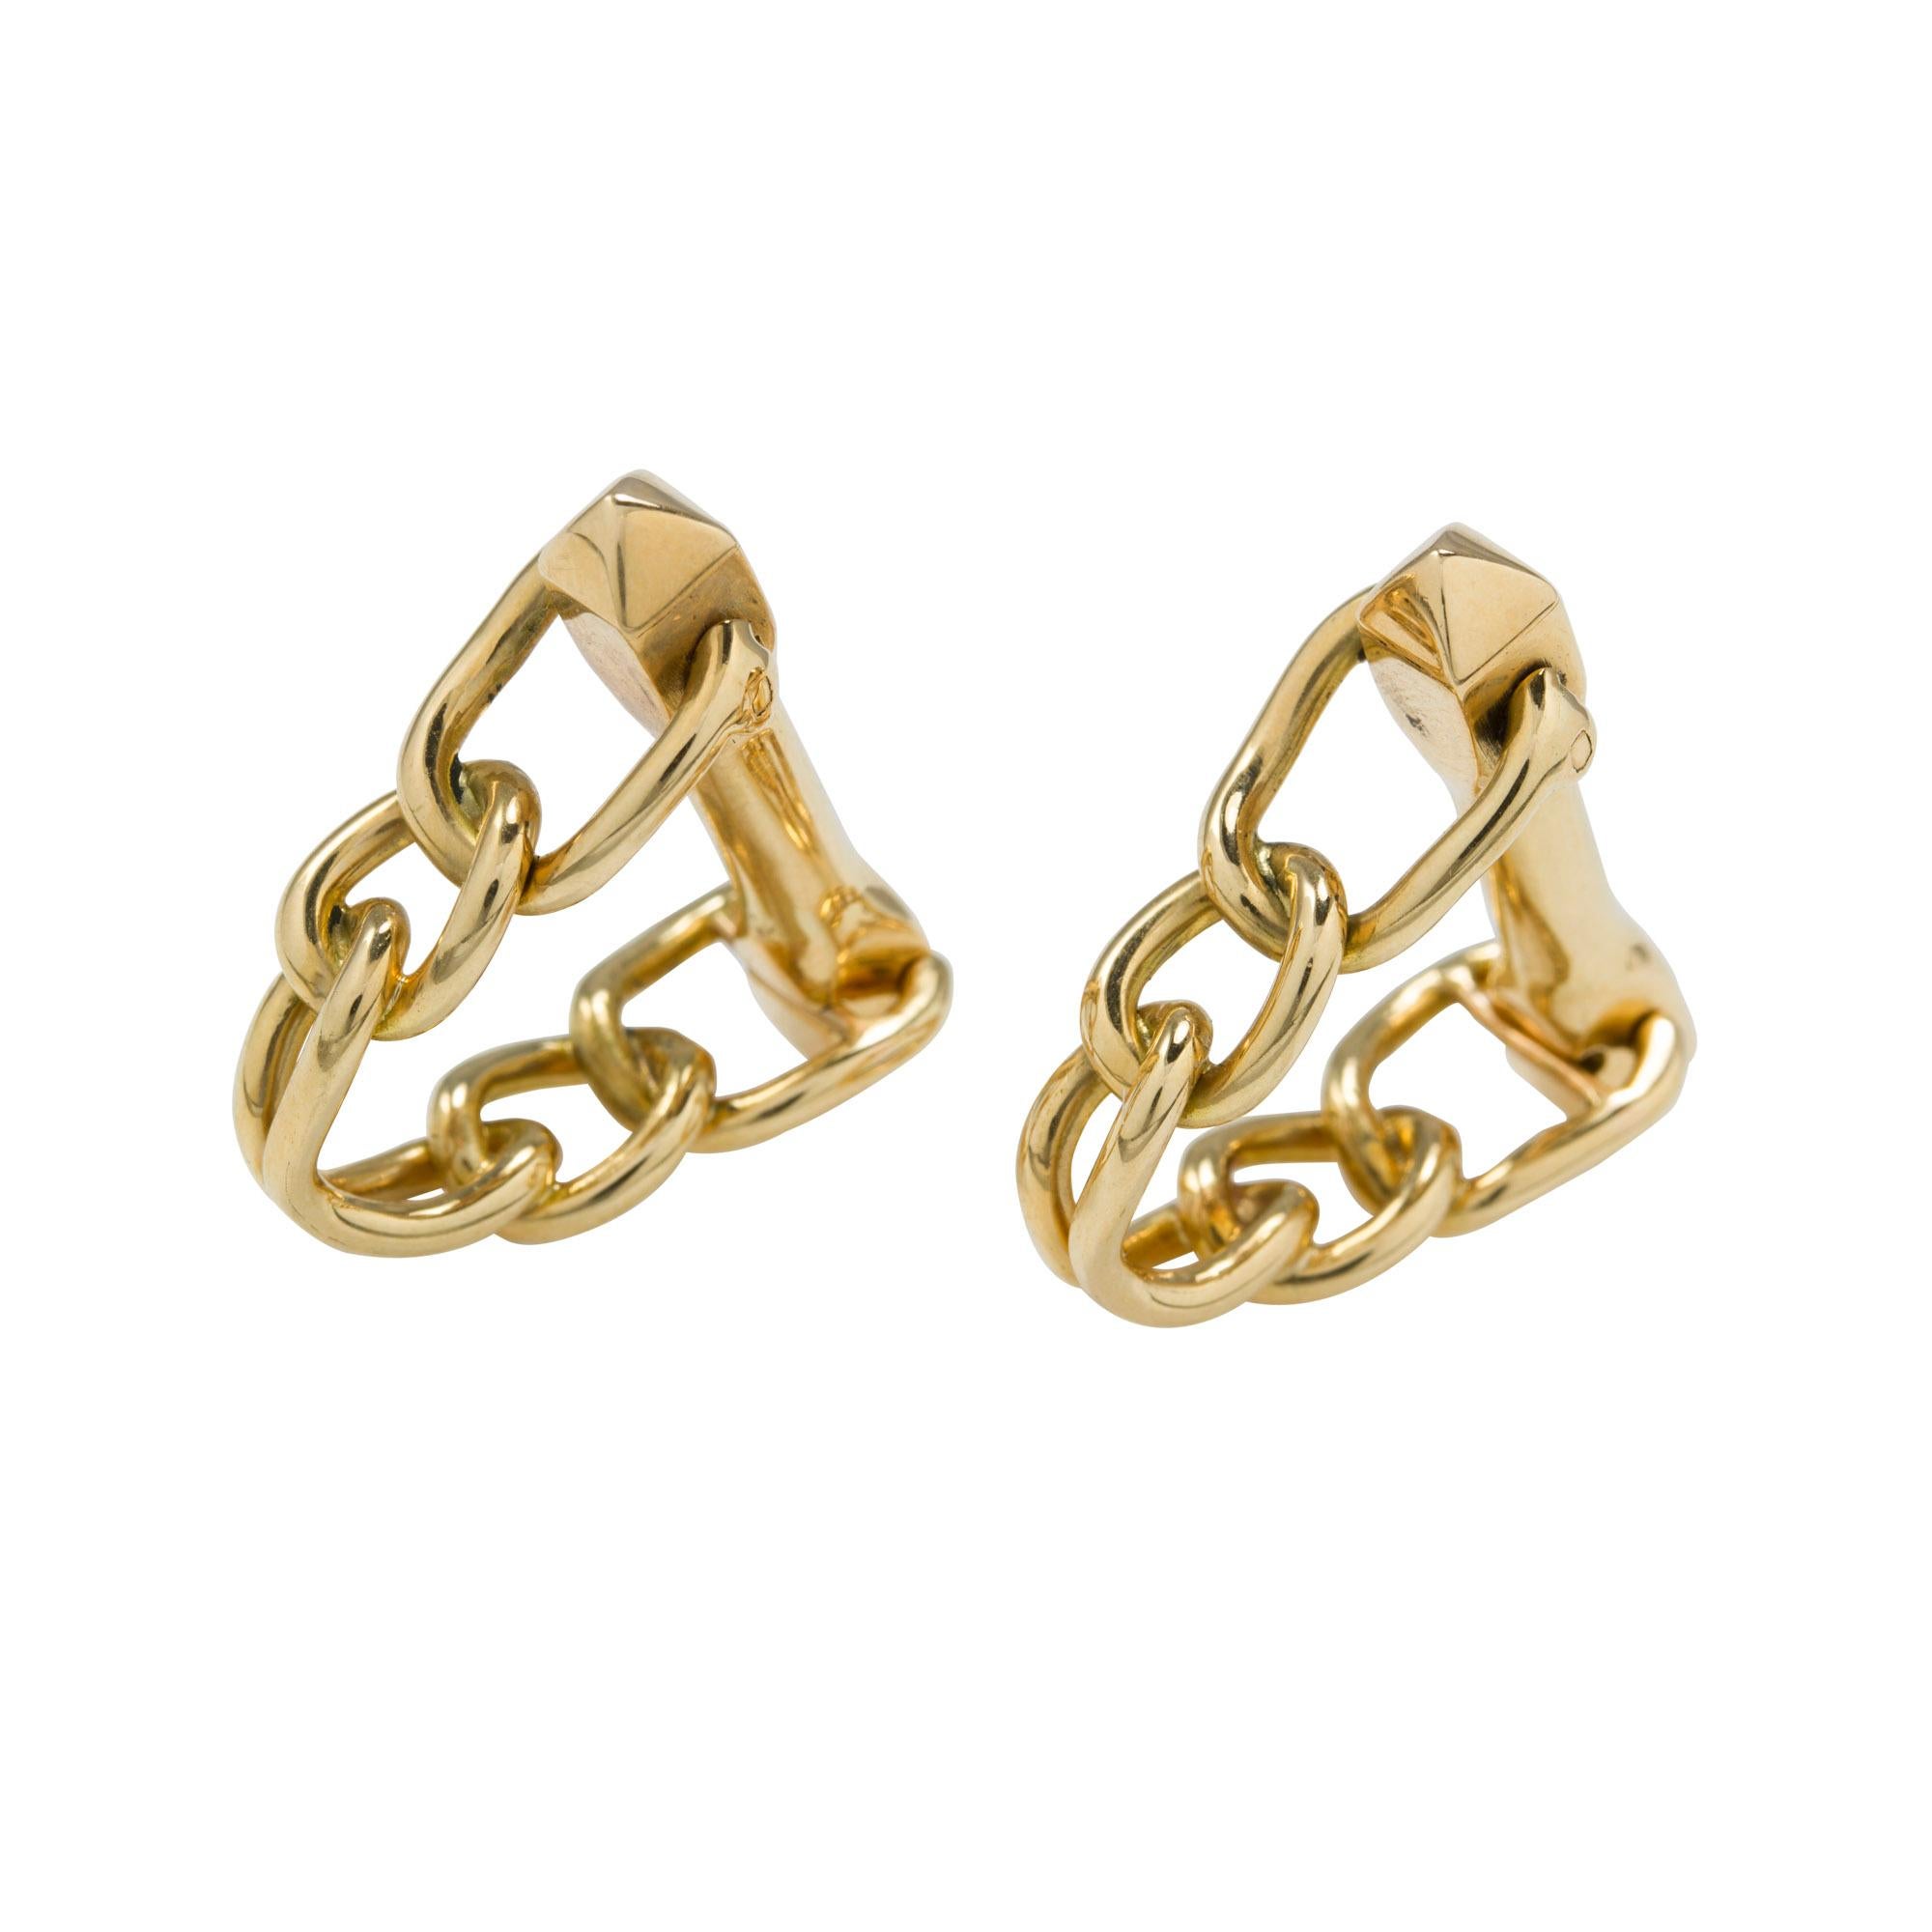 Women's or Men's Pair of French Gold Cufflinks